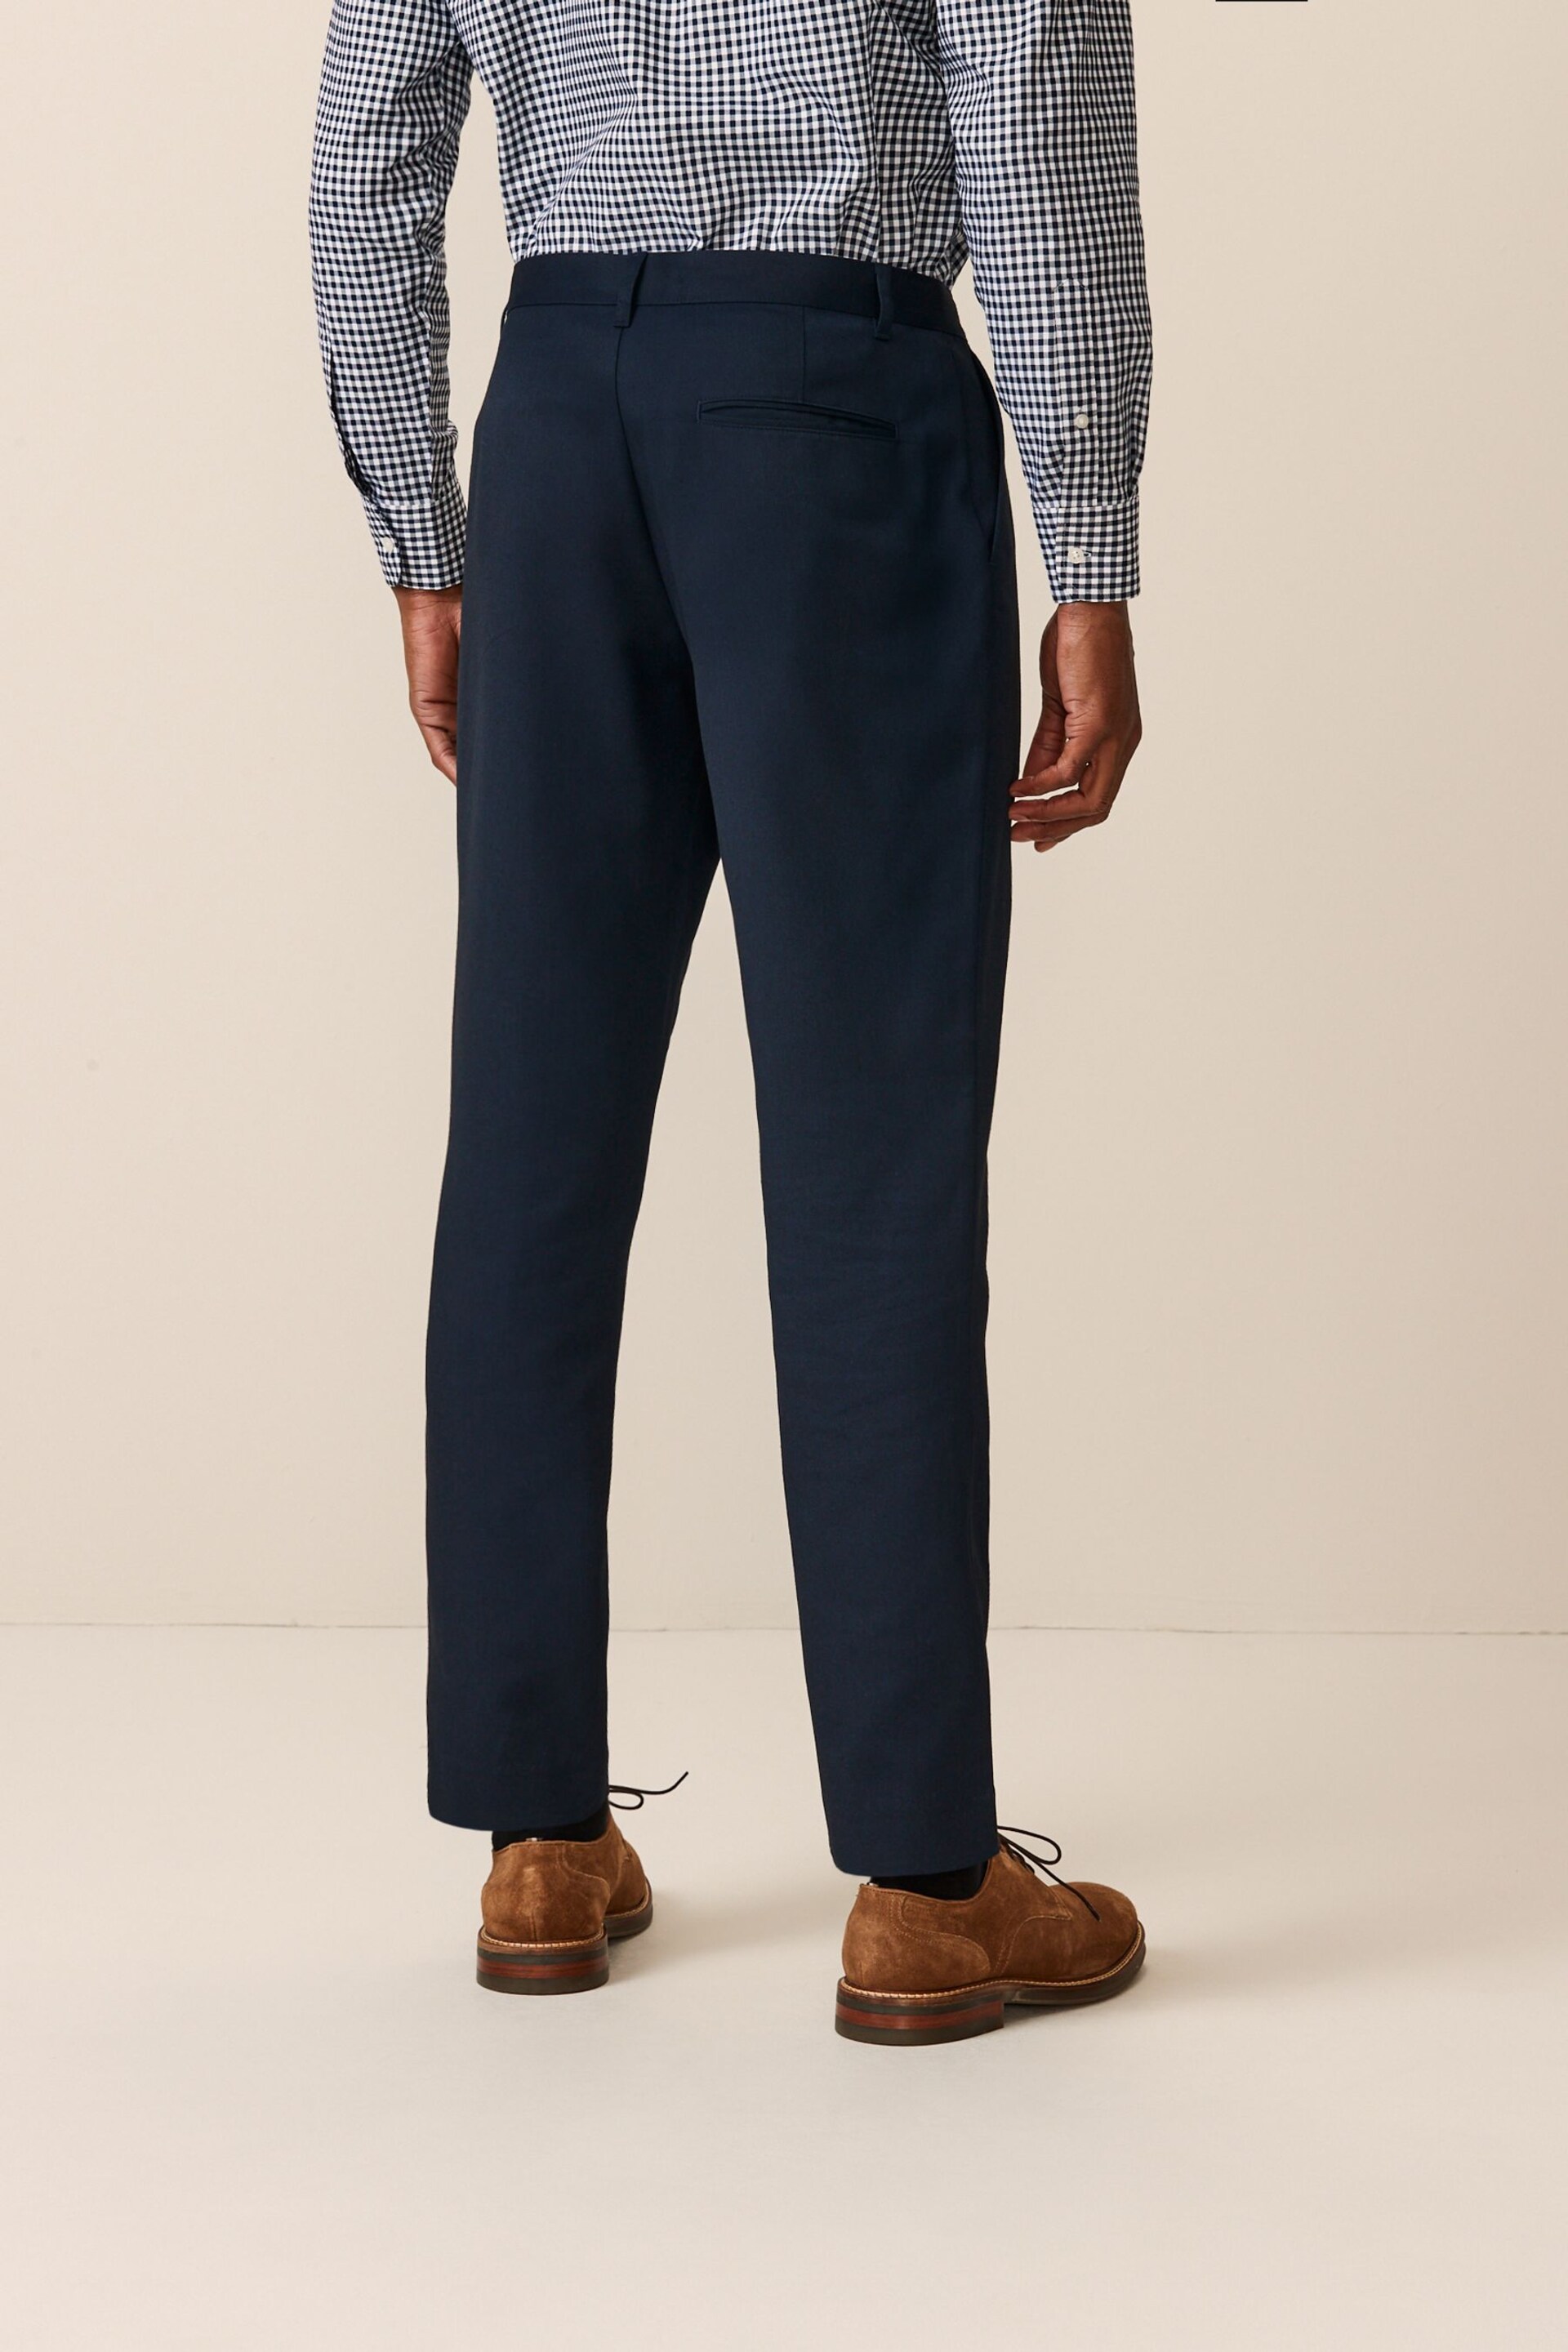 Navy Slim Plain Front Smart Trousers - Image 3 of 9